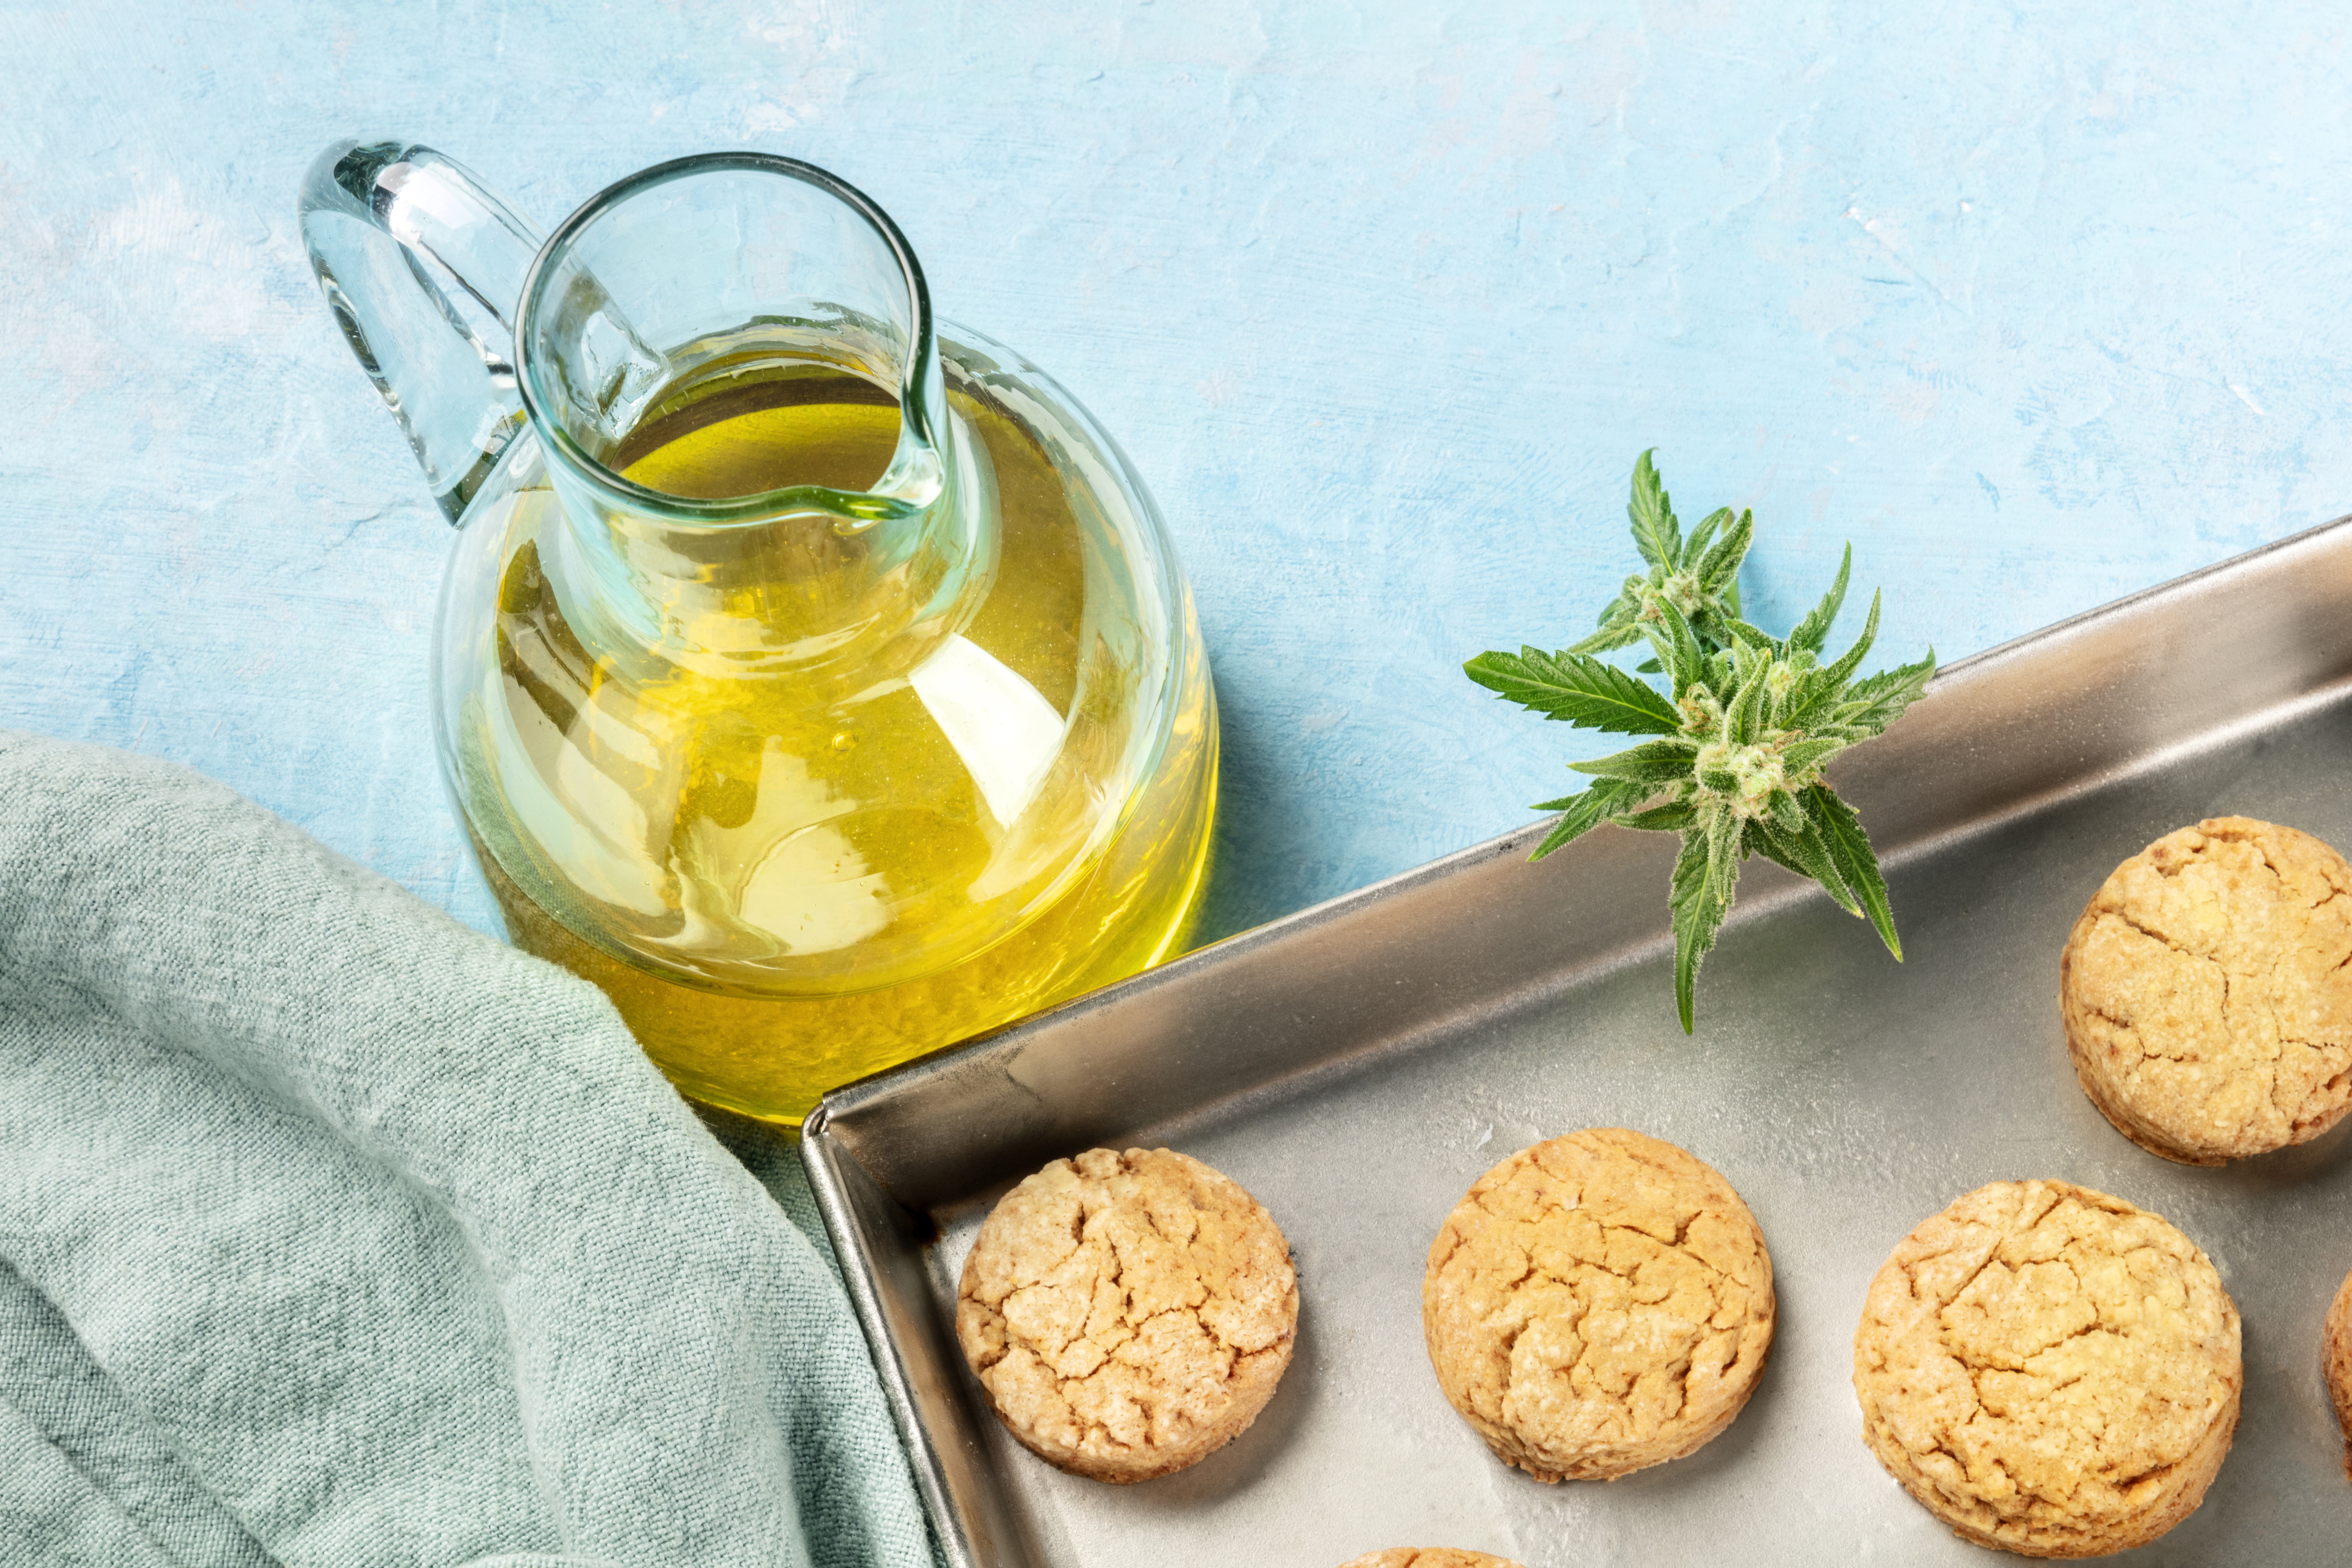 Should I bake with Cannabis Oil or Cannabis-Infused Oils?